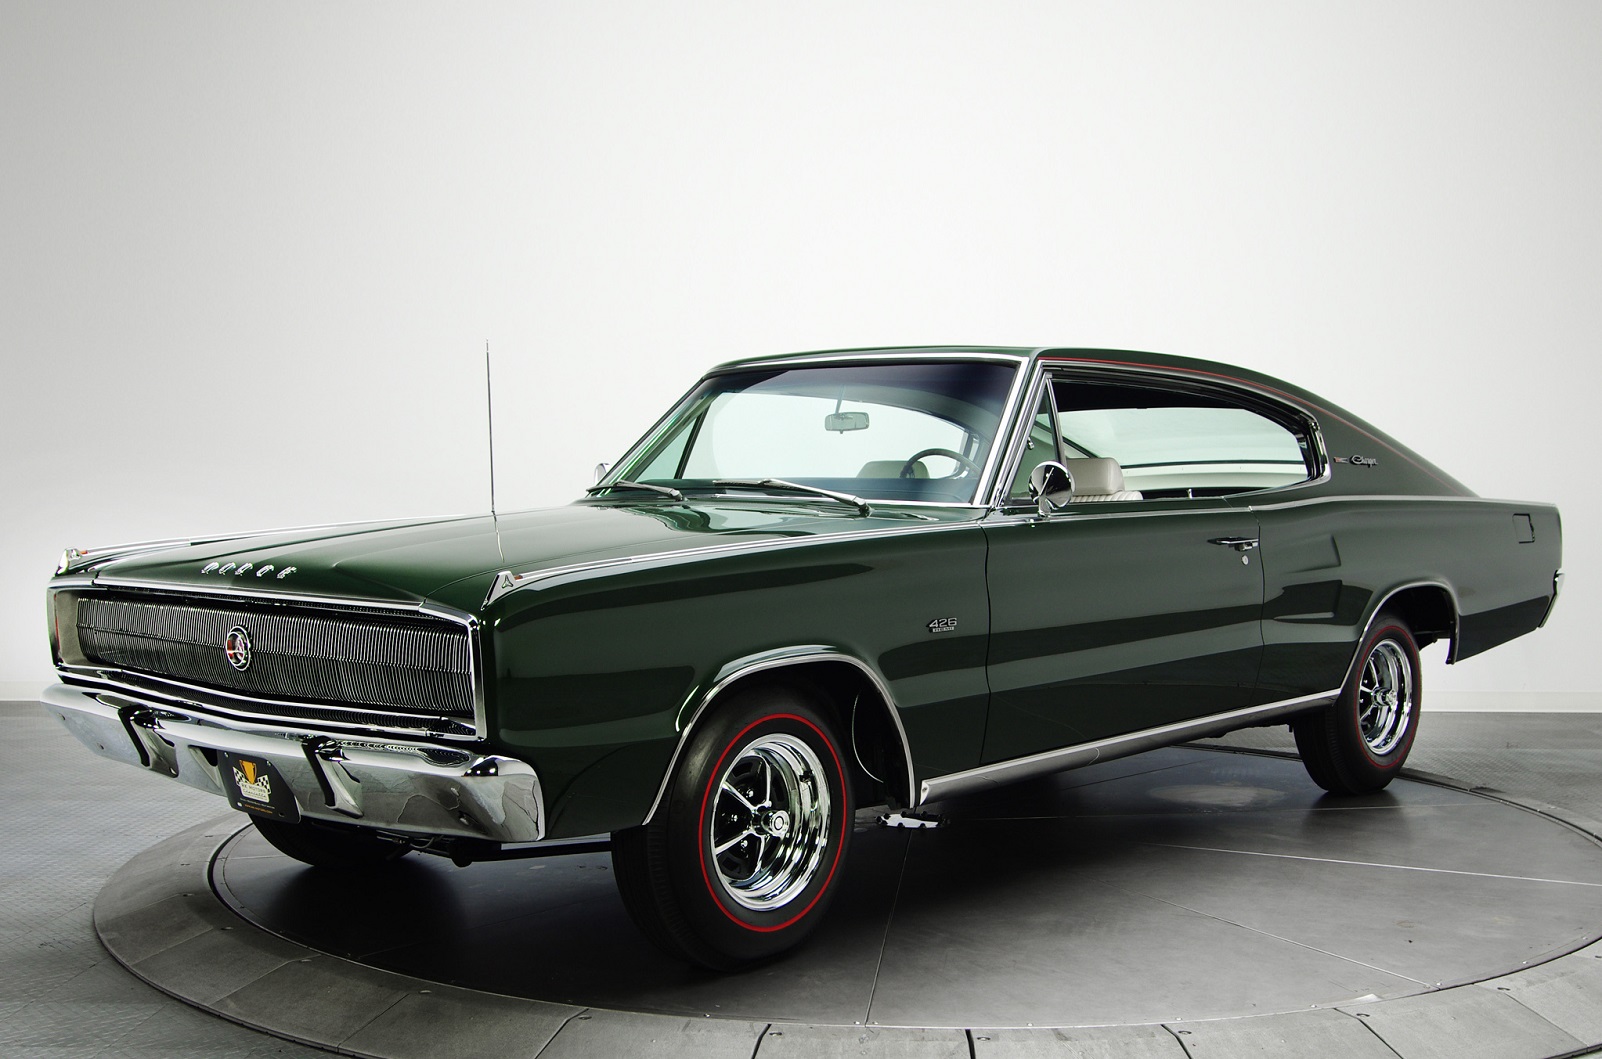 <p>Dodge first fitted the <strong>440cu</strong> in (7.2-liter) big block V8 to the Charger in 1967 as an option in the original series. Called the <strong>Magnum</strong>, it gave 375bhp with a single 4-barrel carburetor and the engine was known as a ‘<strong>wedge’</strong> motor because of its wedge-shaped combustion chambers.</p><p>When the second-generation Charger arrived, so did the R/T, which stood for Road/Track. It used the 7.2-liter engine as standard and customers could opt for the smaller 426 <strong>Hemi</strong> V8 (7.0-liter). Although smaller in size, the 426 had more power as it delivered <strong>425 hp</strong> out of the factory to make it the quicker car.</p>